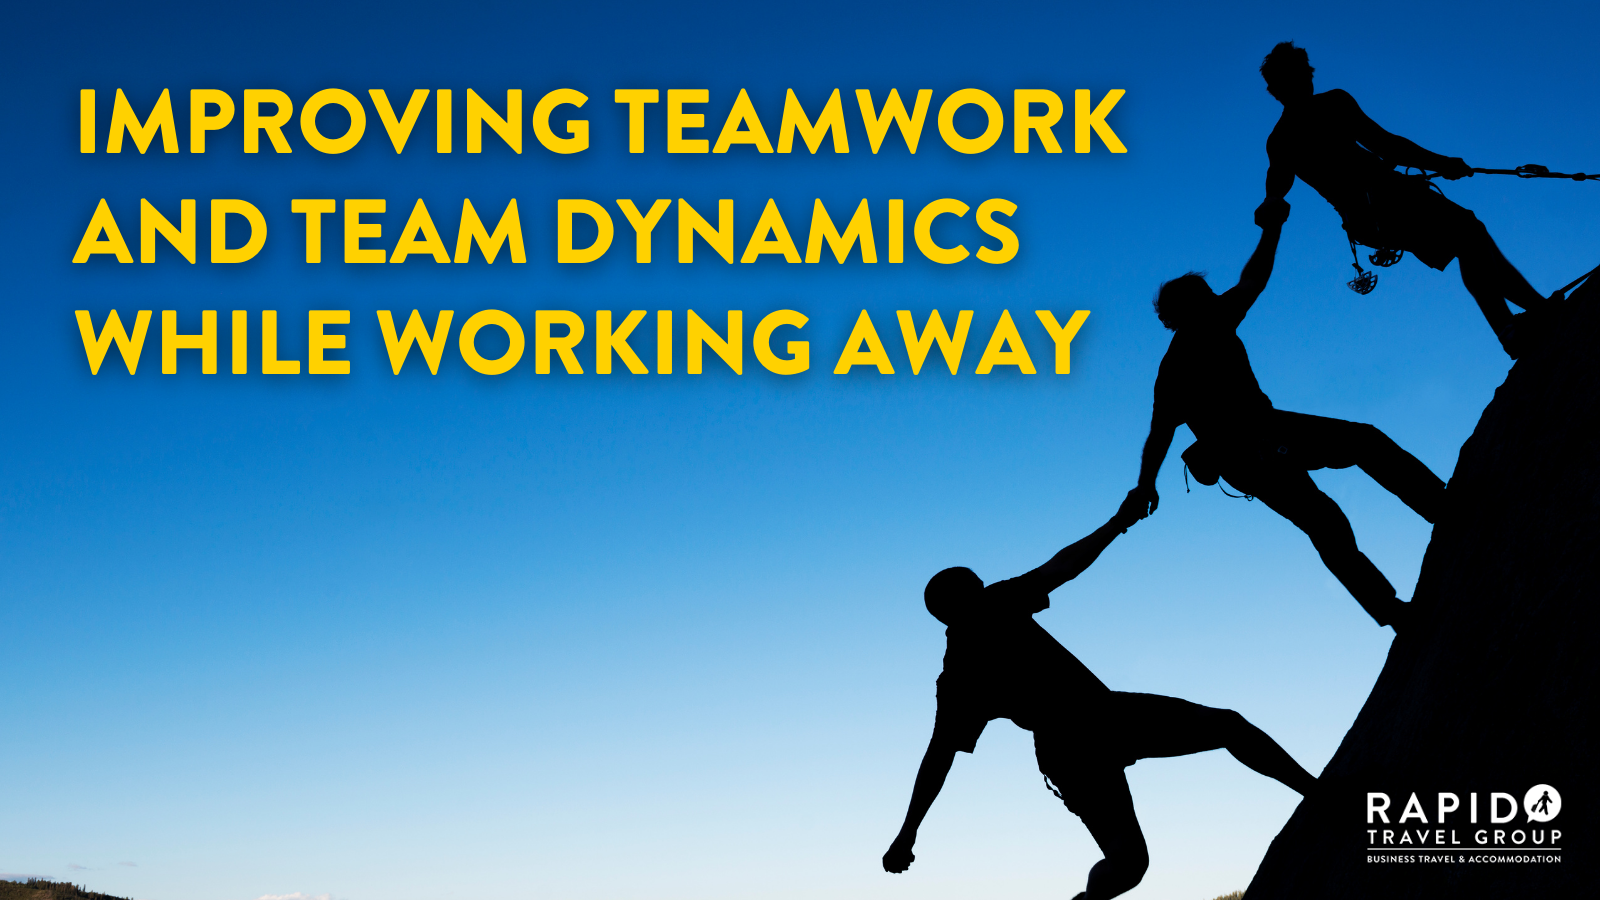 Improving teamwork and team dynamics while working away